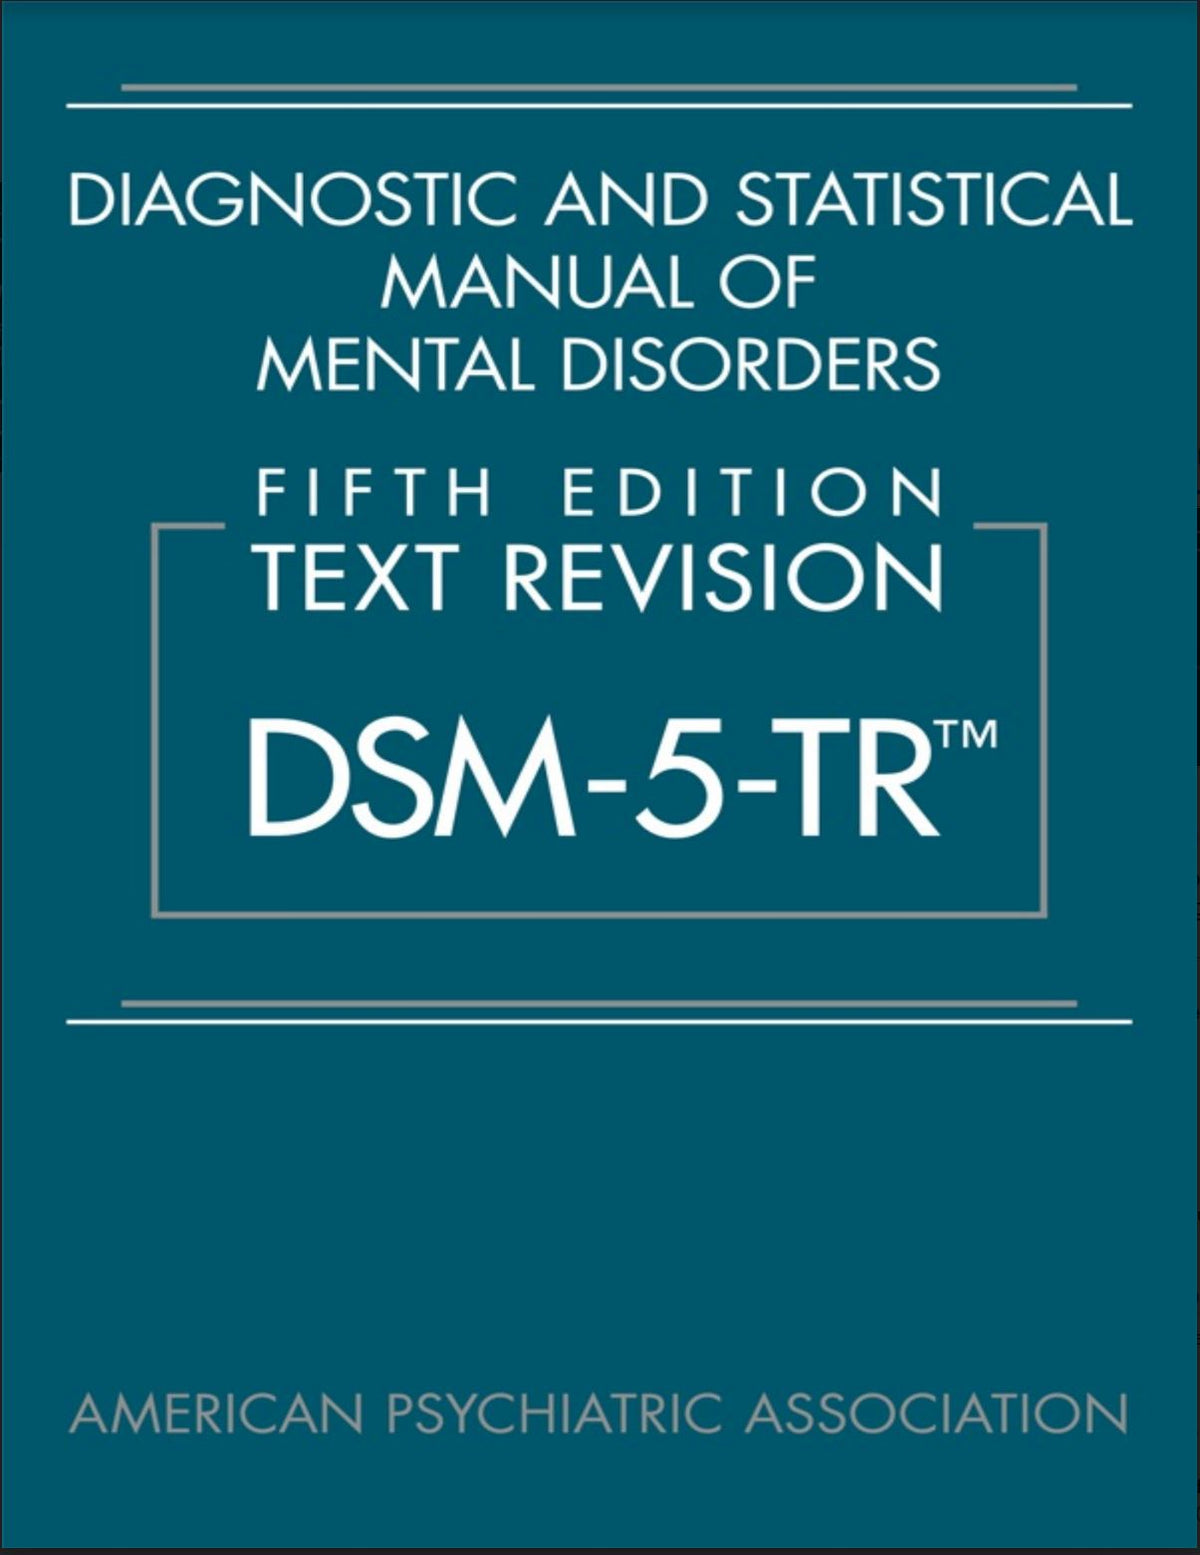 Diagnostic And Statistical Manual  Of Mental Disorders 5th Edition - DSM-5-TR- PDF Instant Download